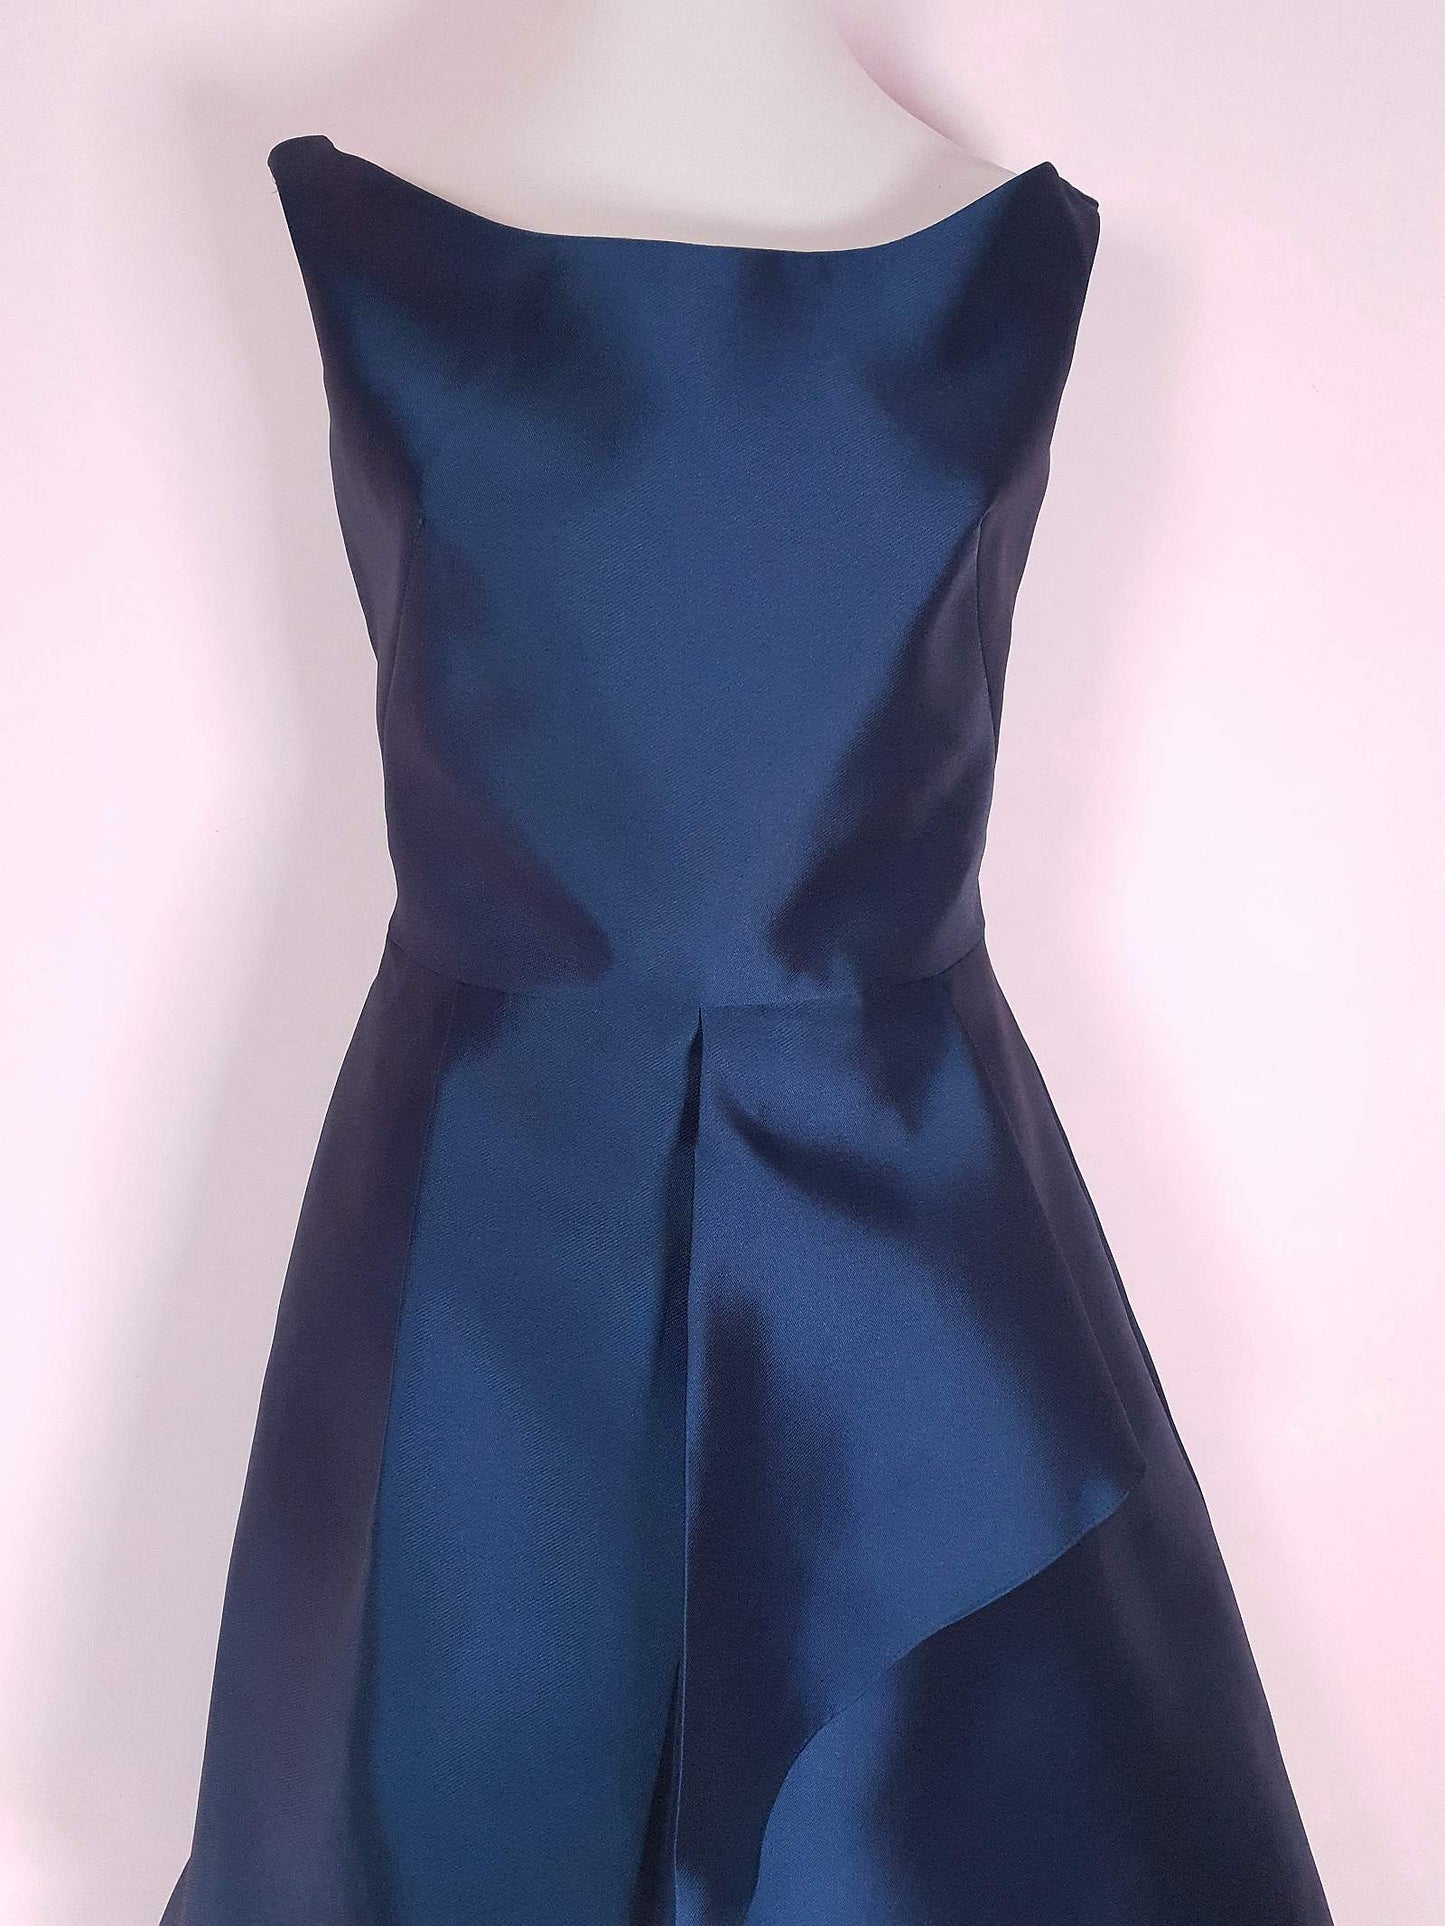 Pre-owned Lela Rose Blue Midi Dress Cocktail Party Bridesmaid Fit & Flare Prom